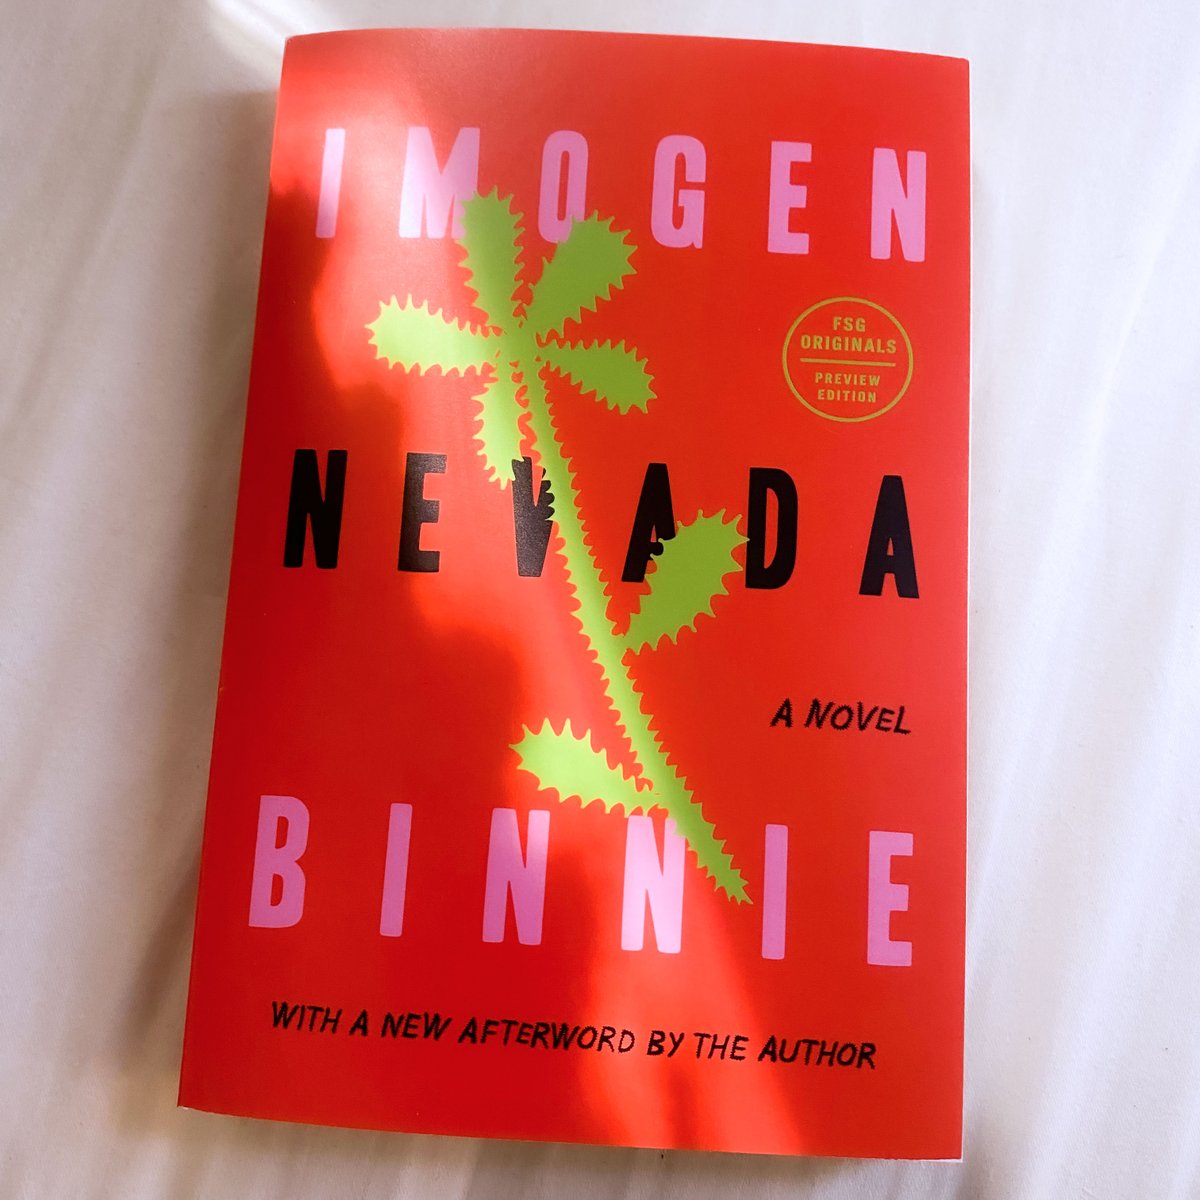 Join @imogenbinnie and @bluestockings for the in-person launch event for NEVADA tomorrow evening! Register here: bit.ly/3zkOyY1